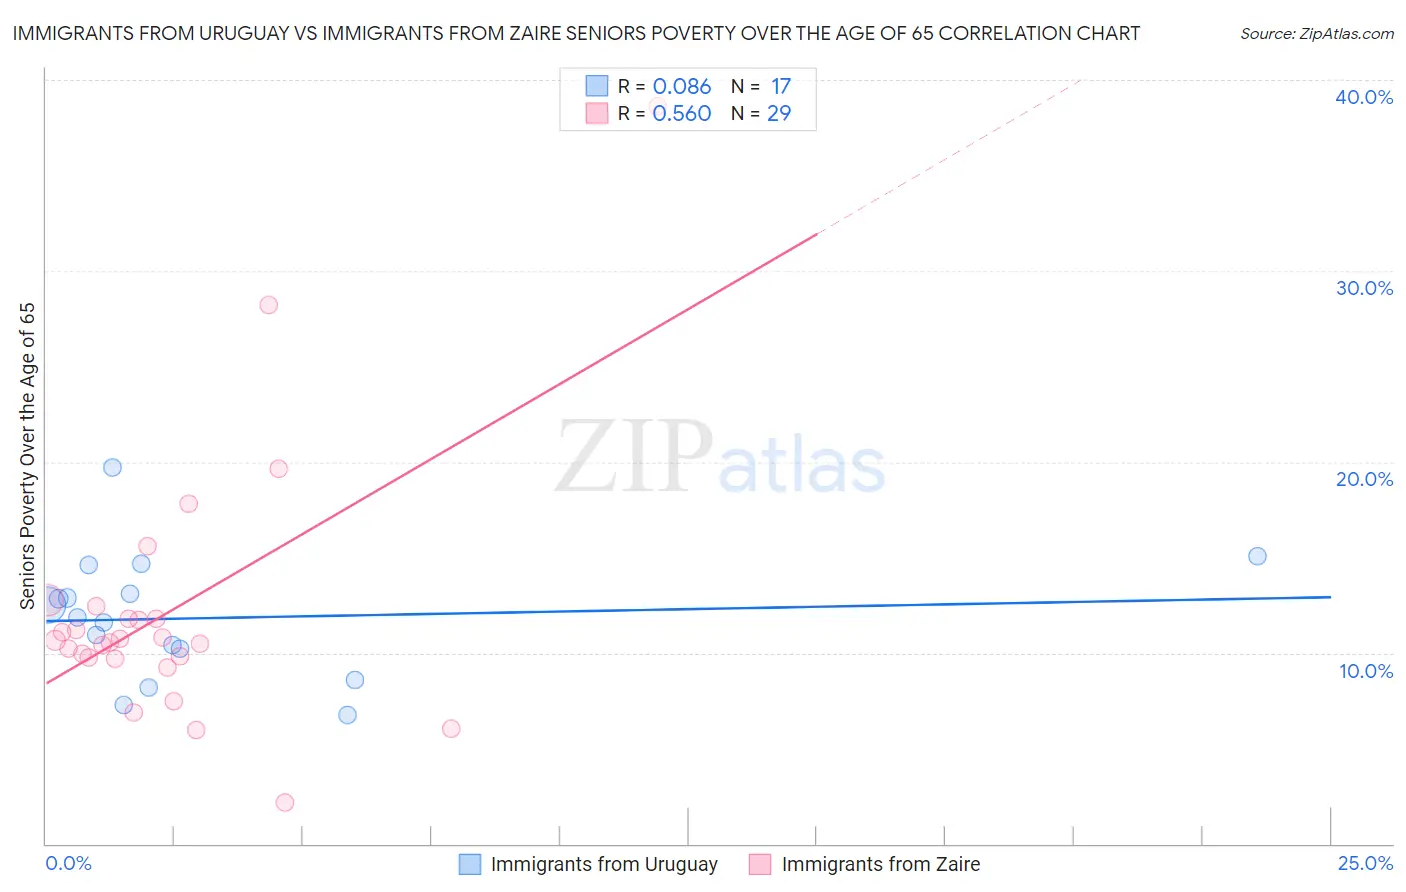 Immigrants from Uruguay vs Immigrants from Zaire Seniors Poverty Over the Age of 65